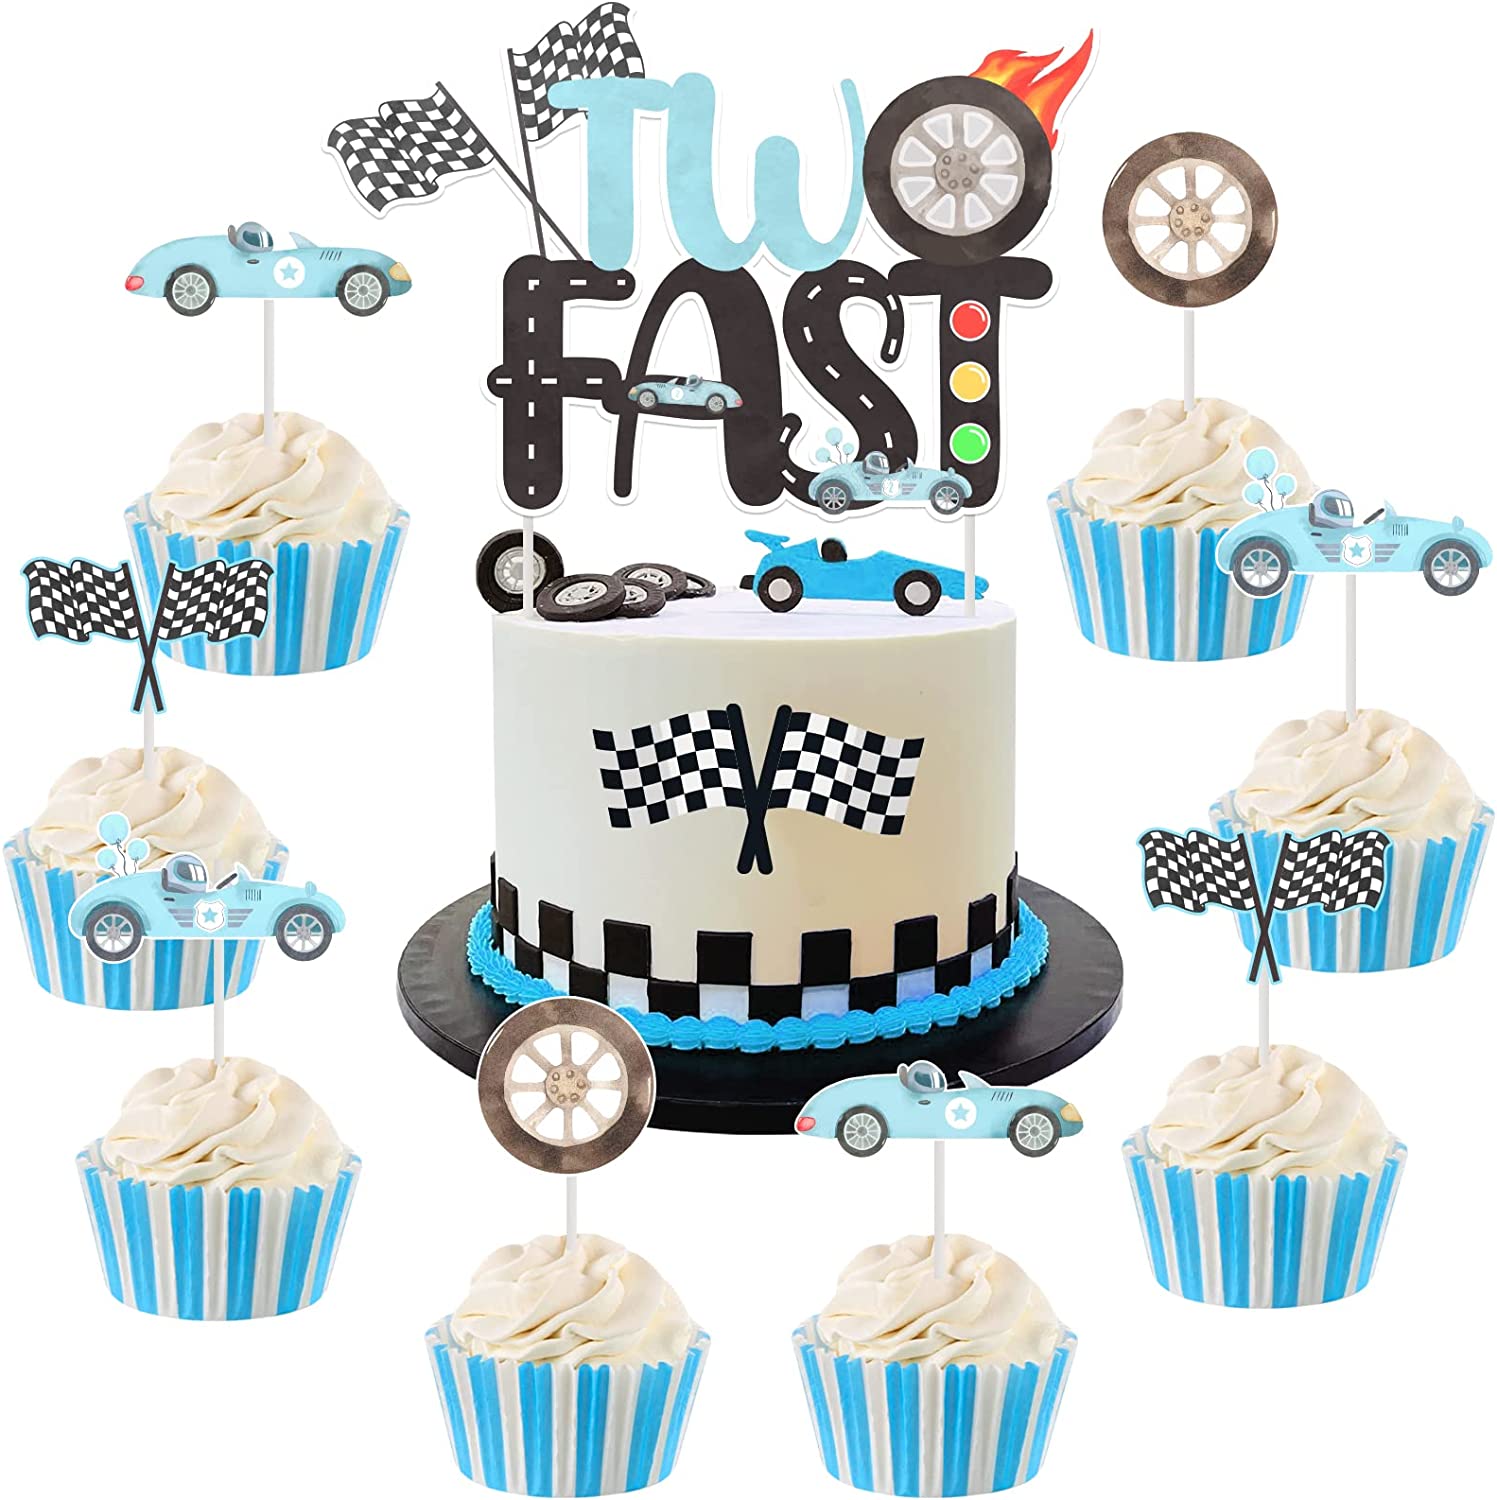 Delicious Cake Design - A cute racing car themed 1st birthday cake. Racing  cars hand cut from fondant zoom around the sides below the puffy fondant  clouds. A hand crafted little racing